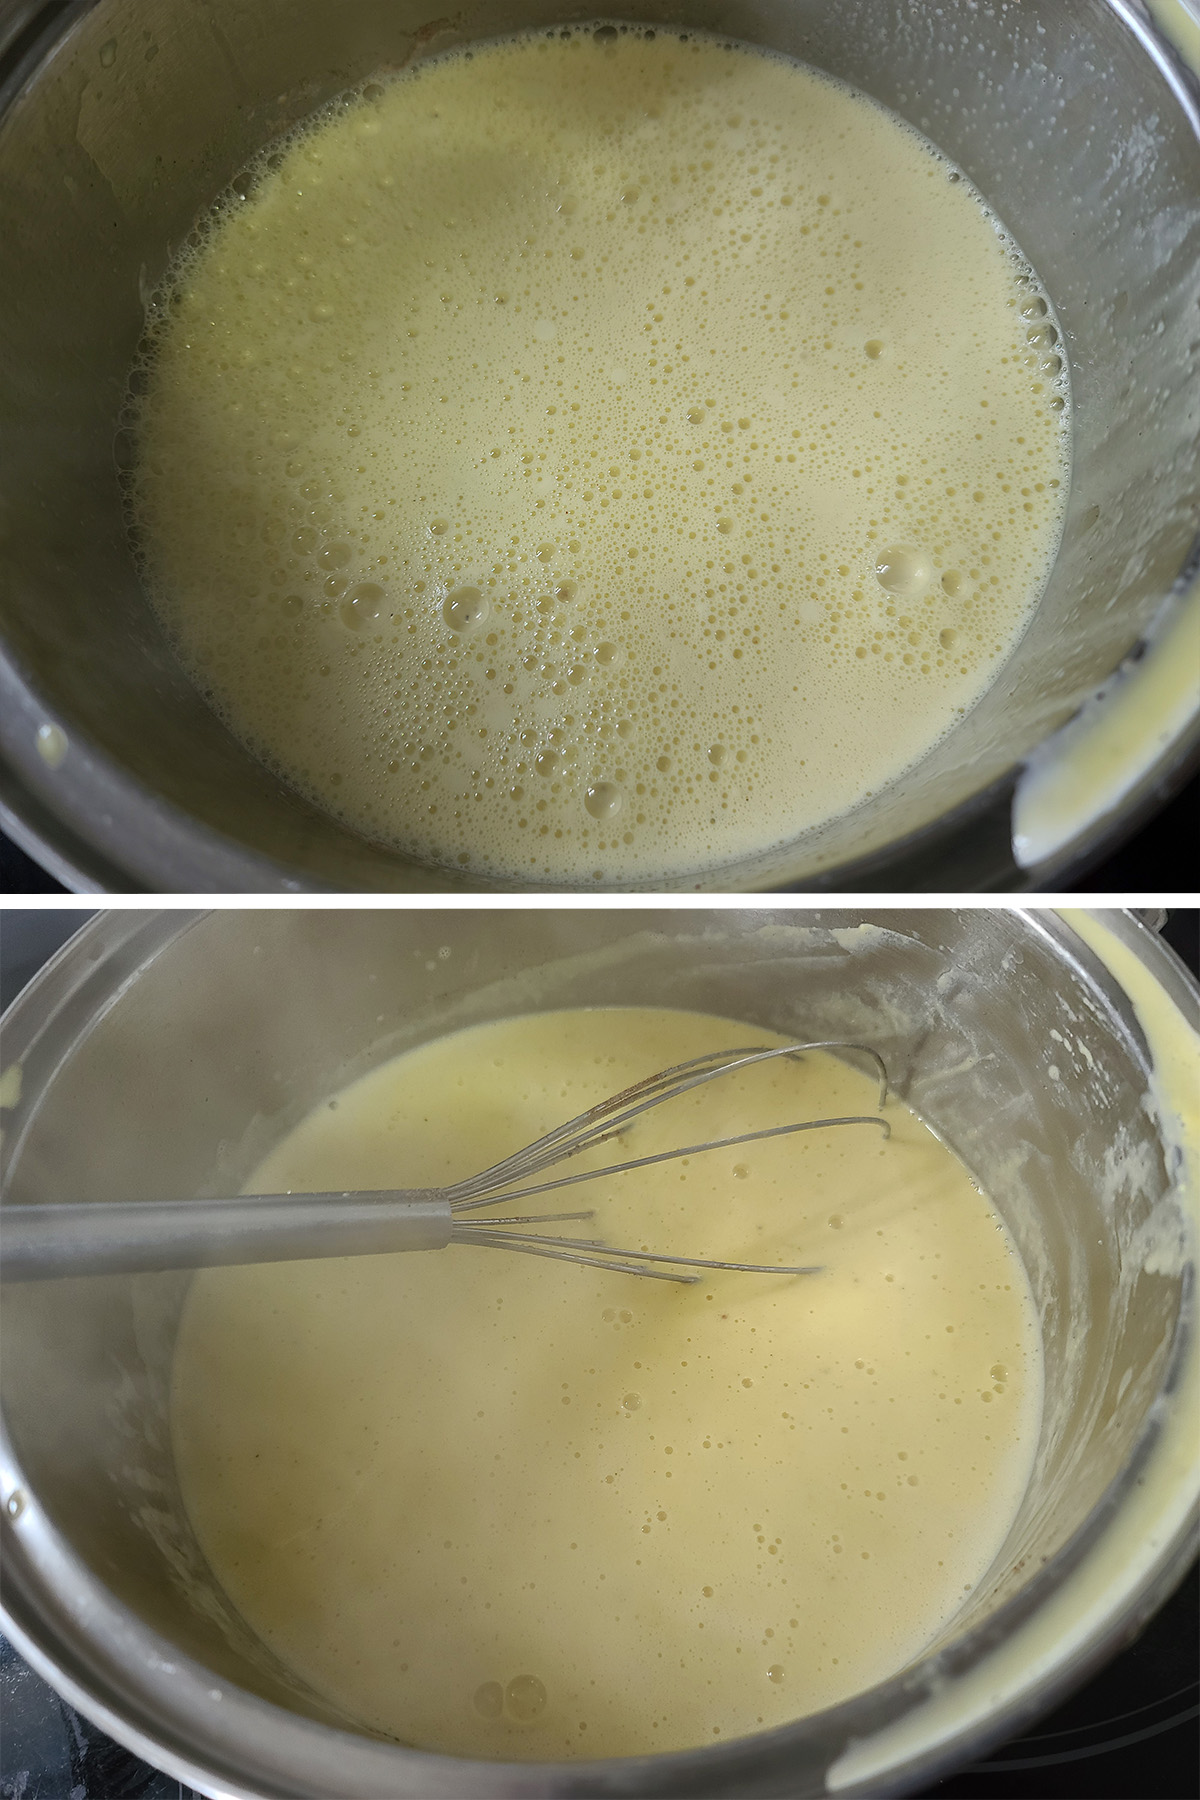 A two part image showing the eggnog cooking and thickening.